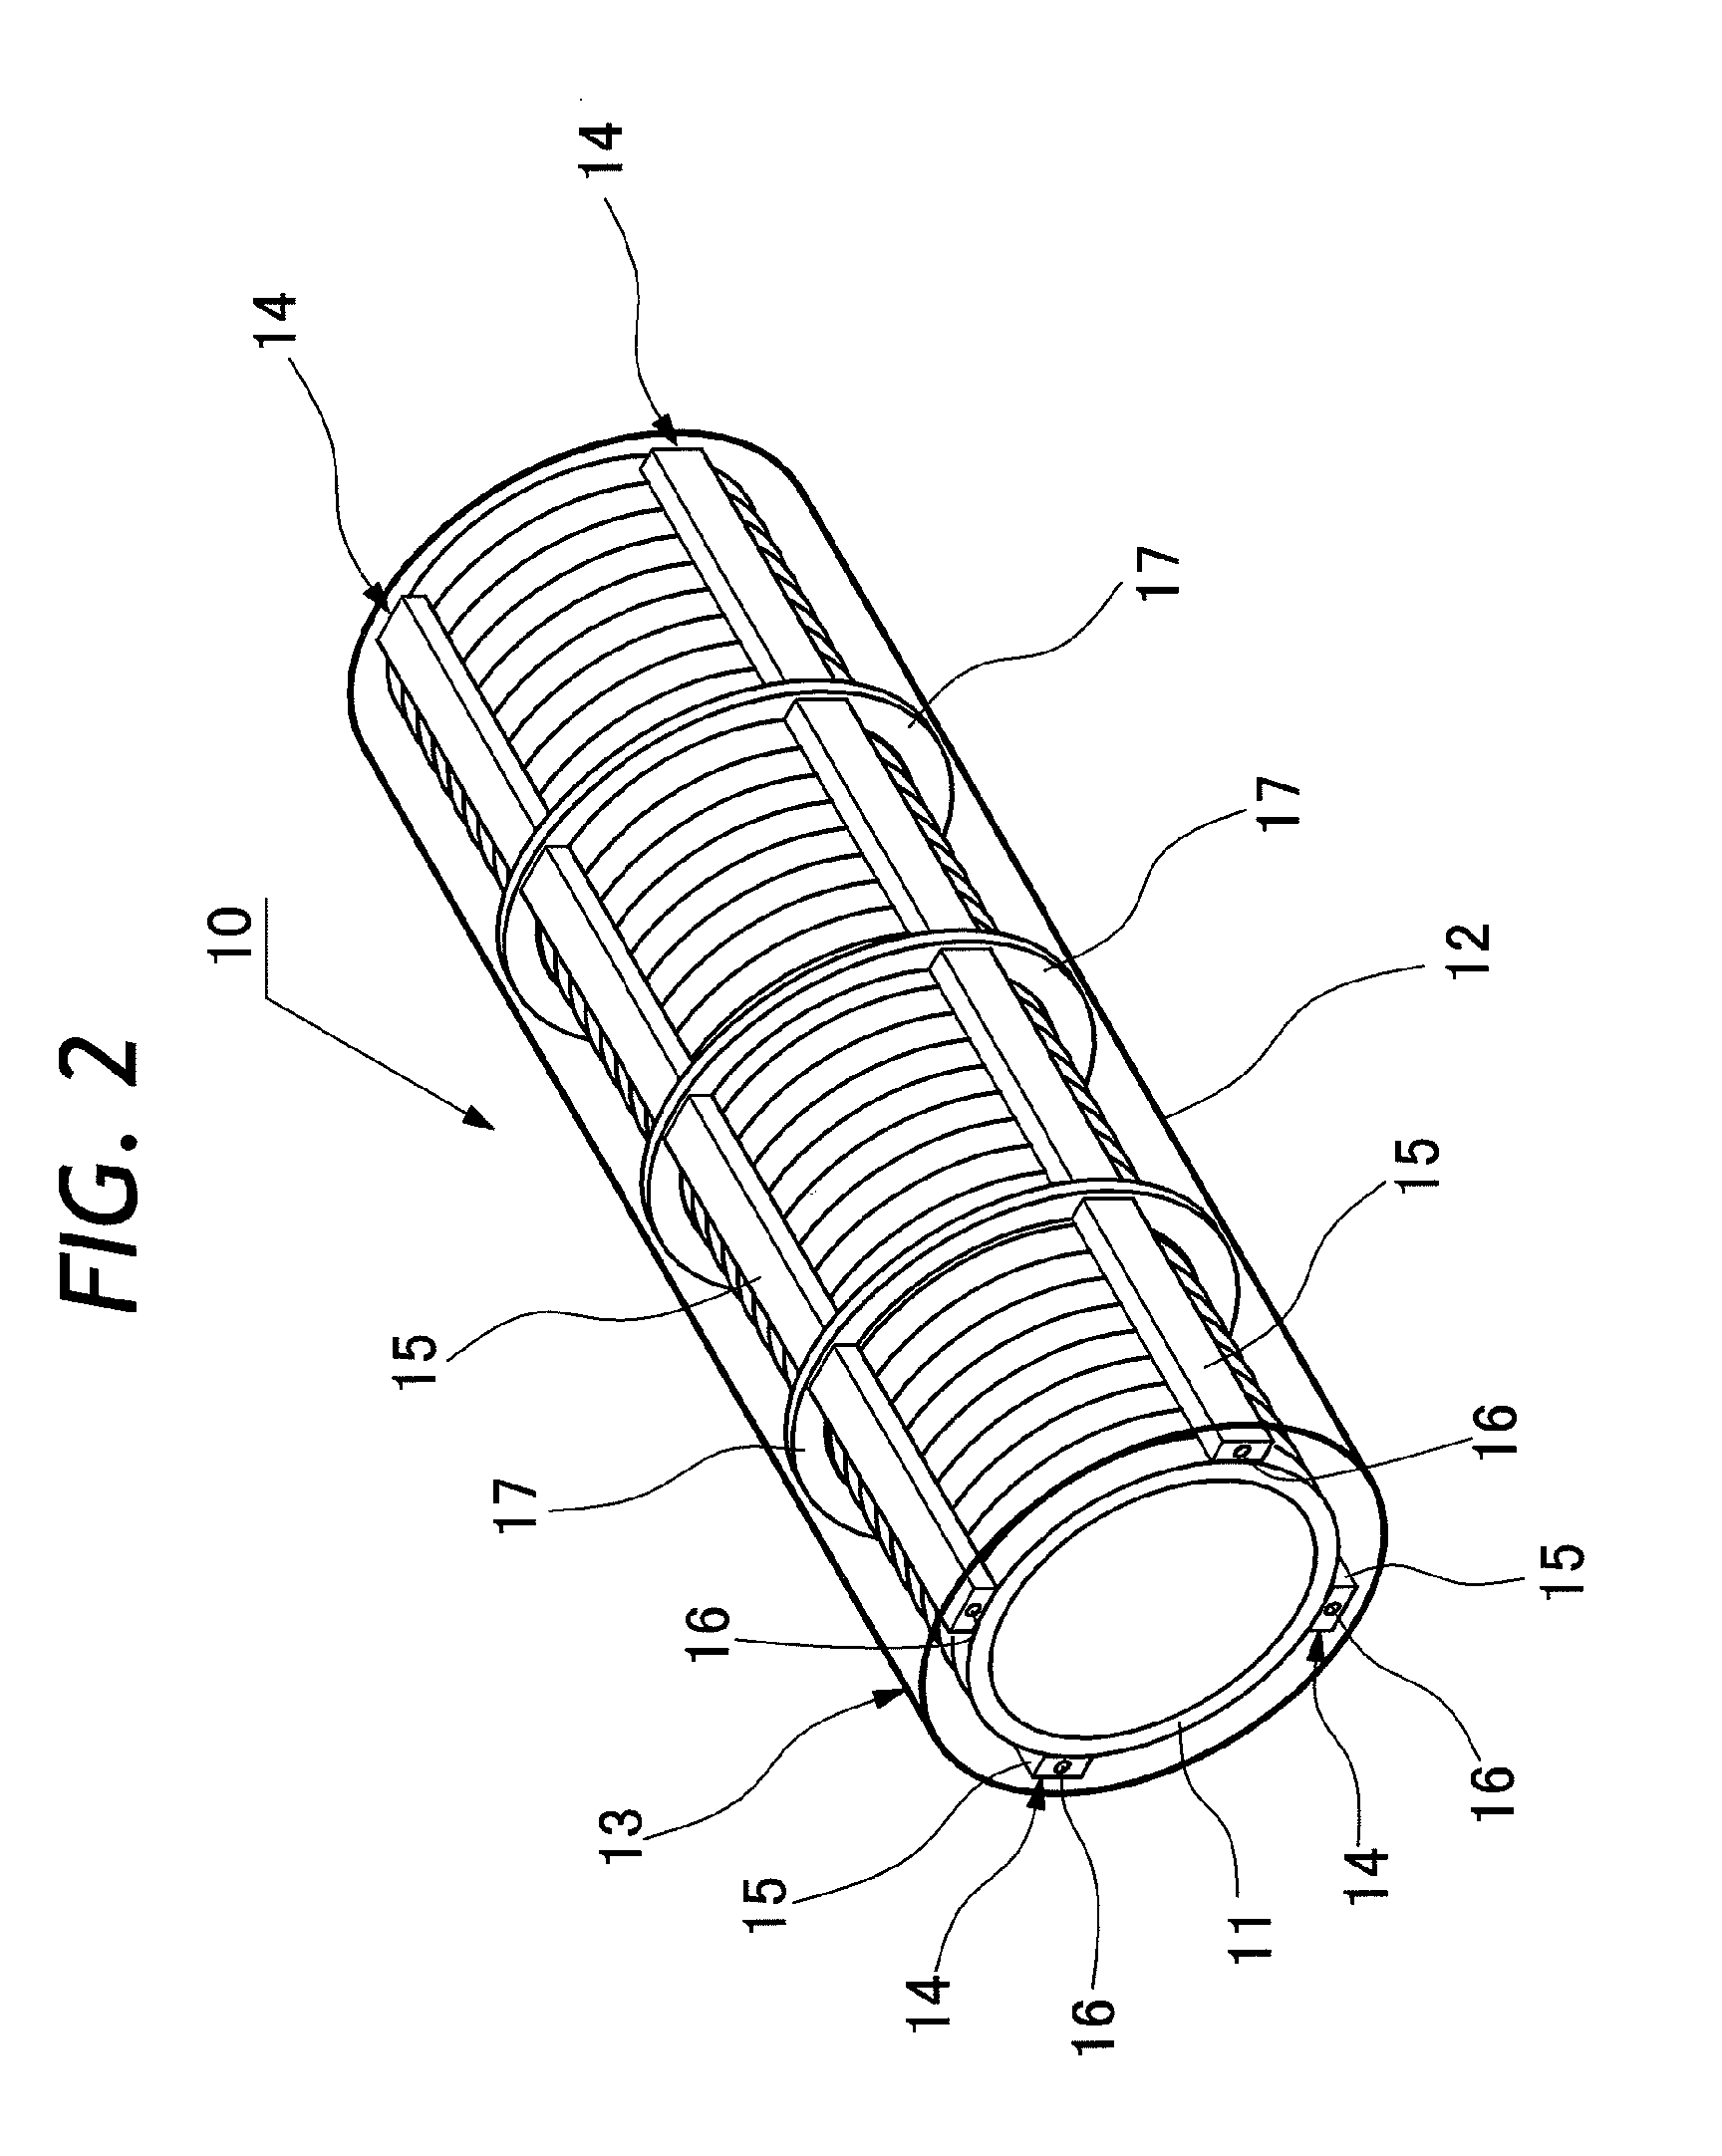 Guide tube for guiding endoscope or surgical tool in or into body cavity